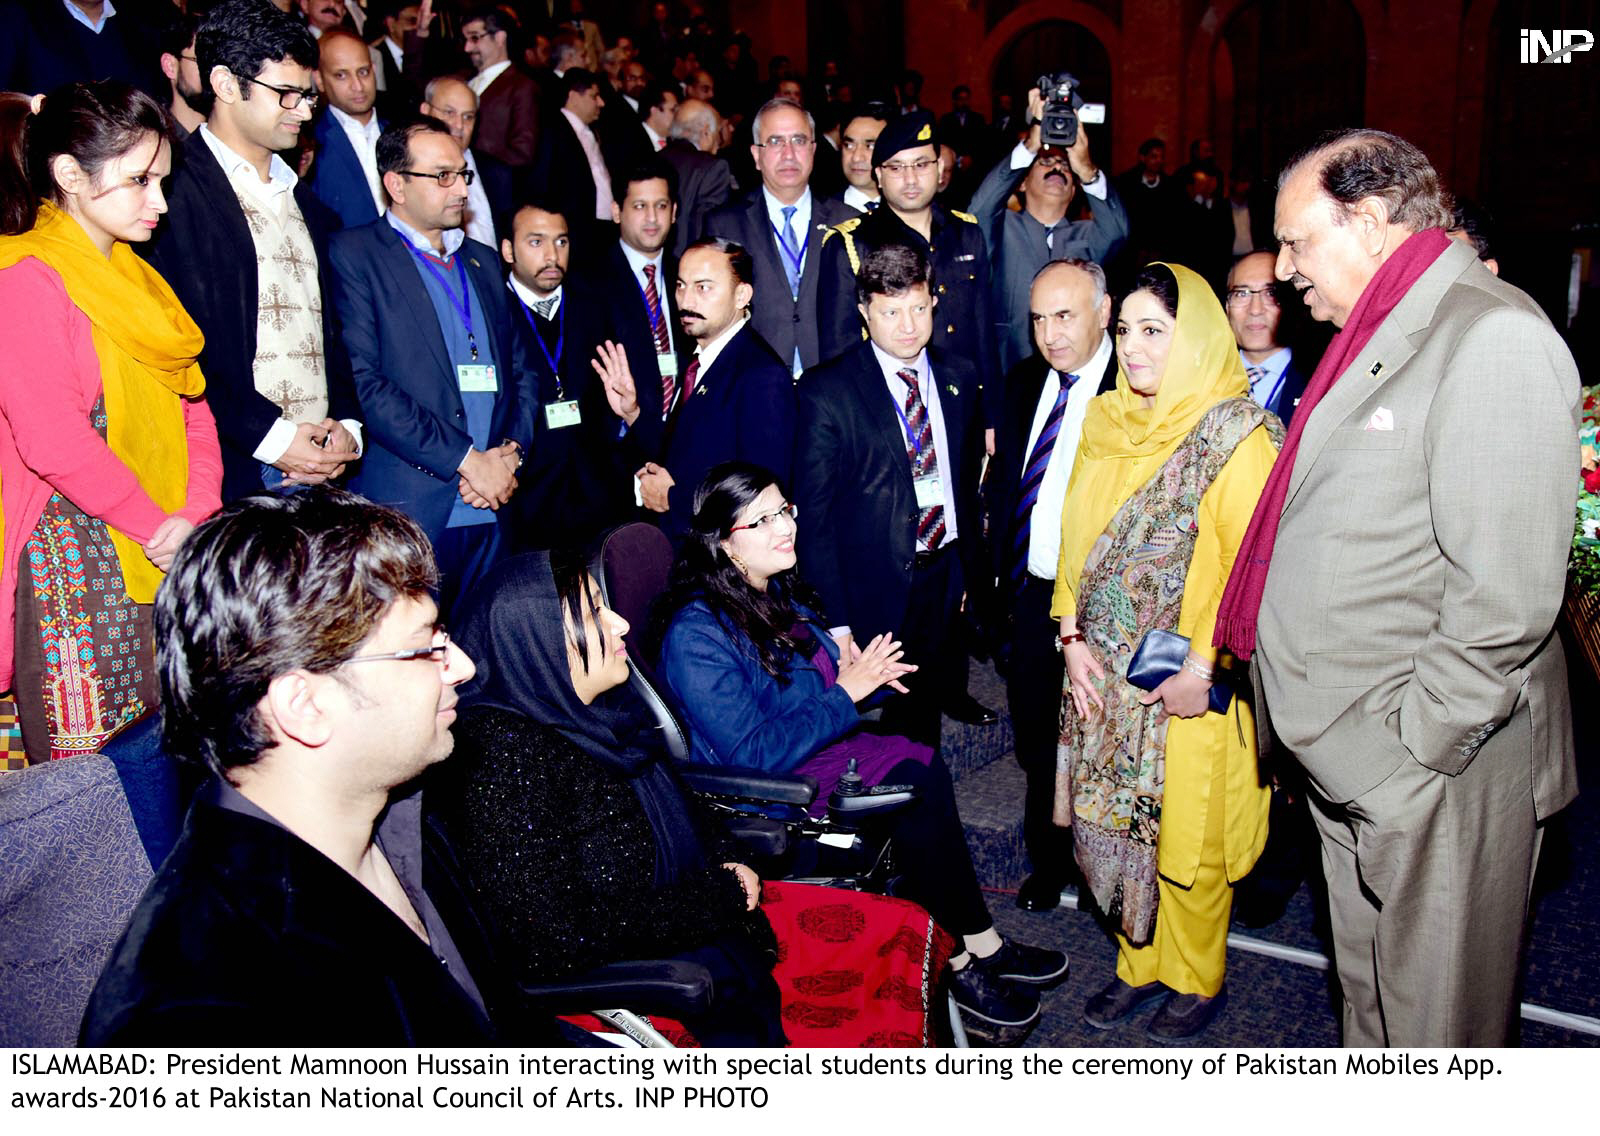 president mamnoon hussain interacting with special students during the cermony of pakistan mobile app wards photo inp